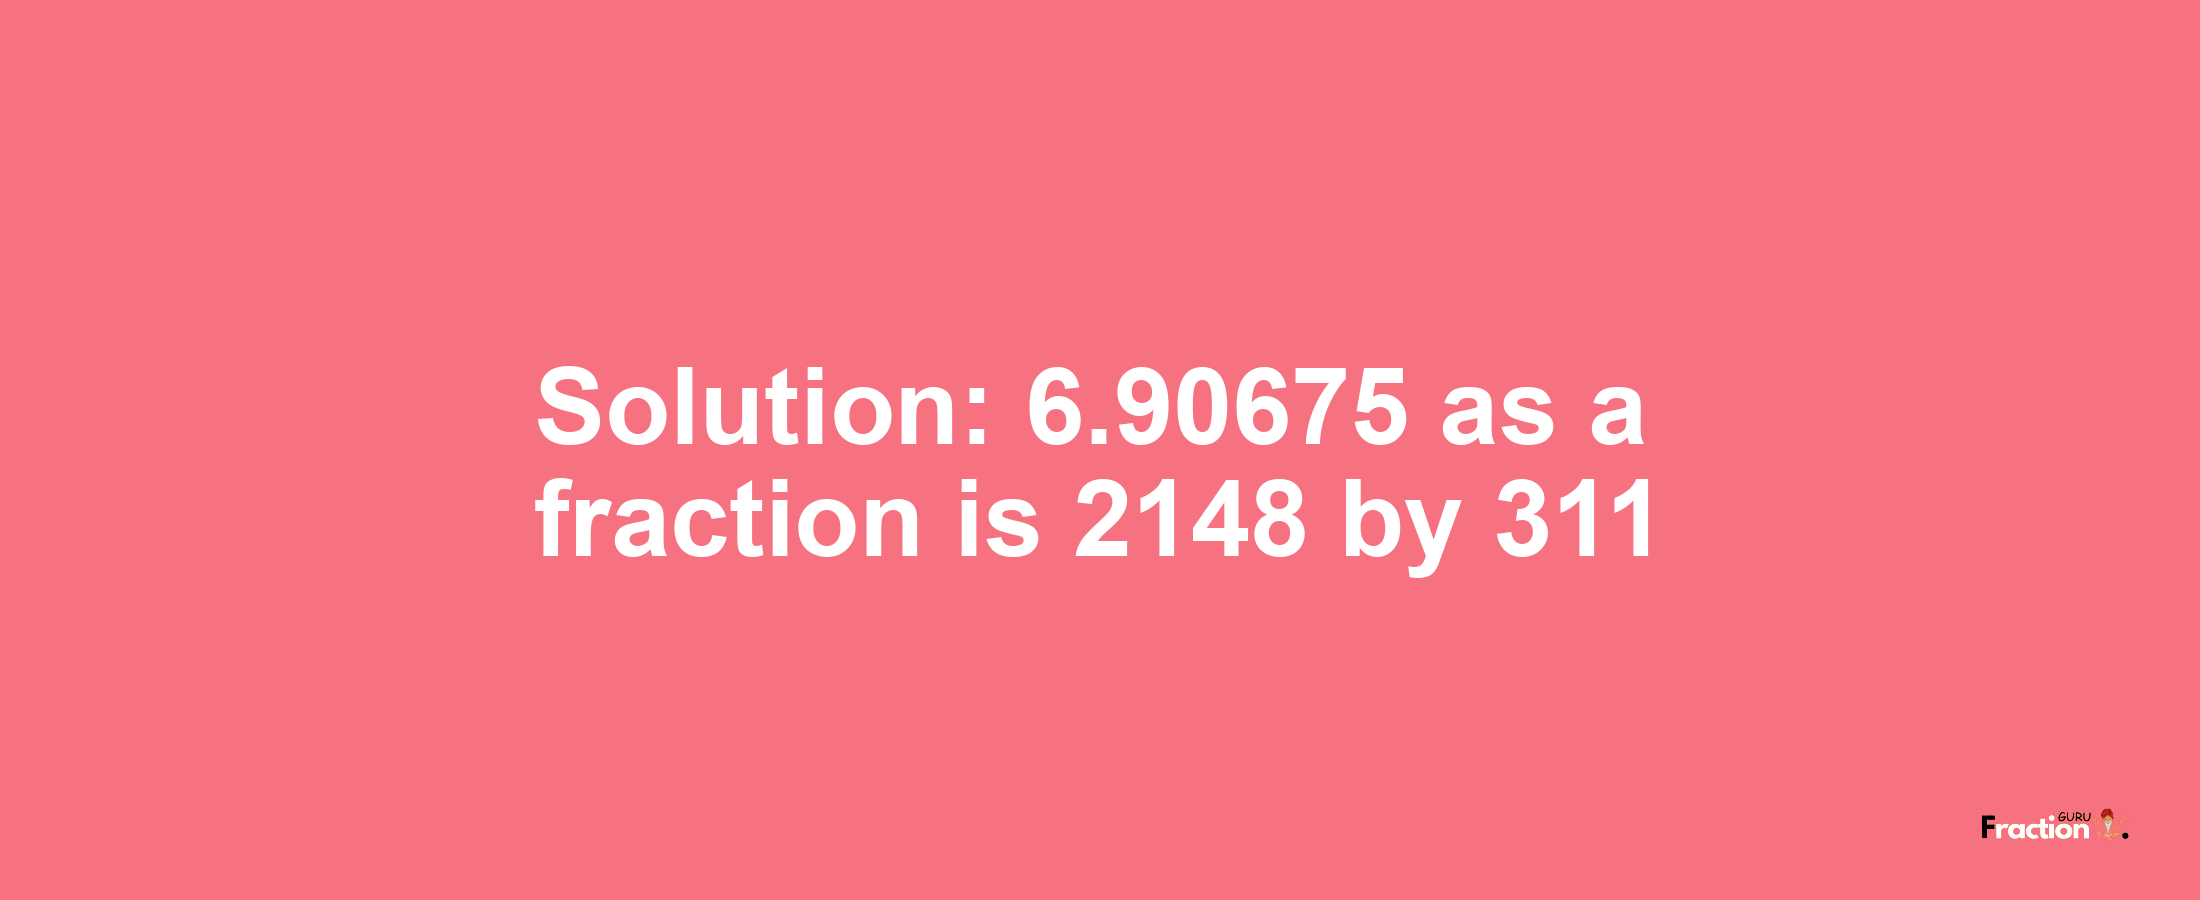 Solution:6.90675 as a fraction is 2148/311